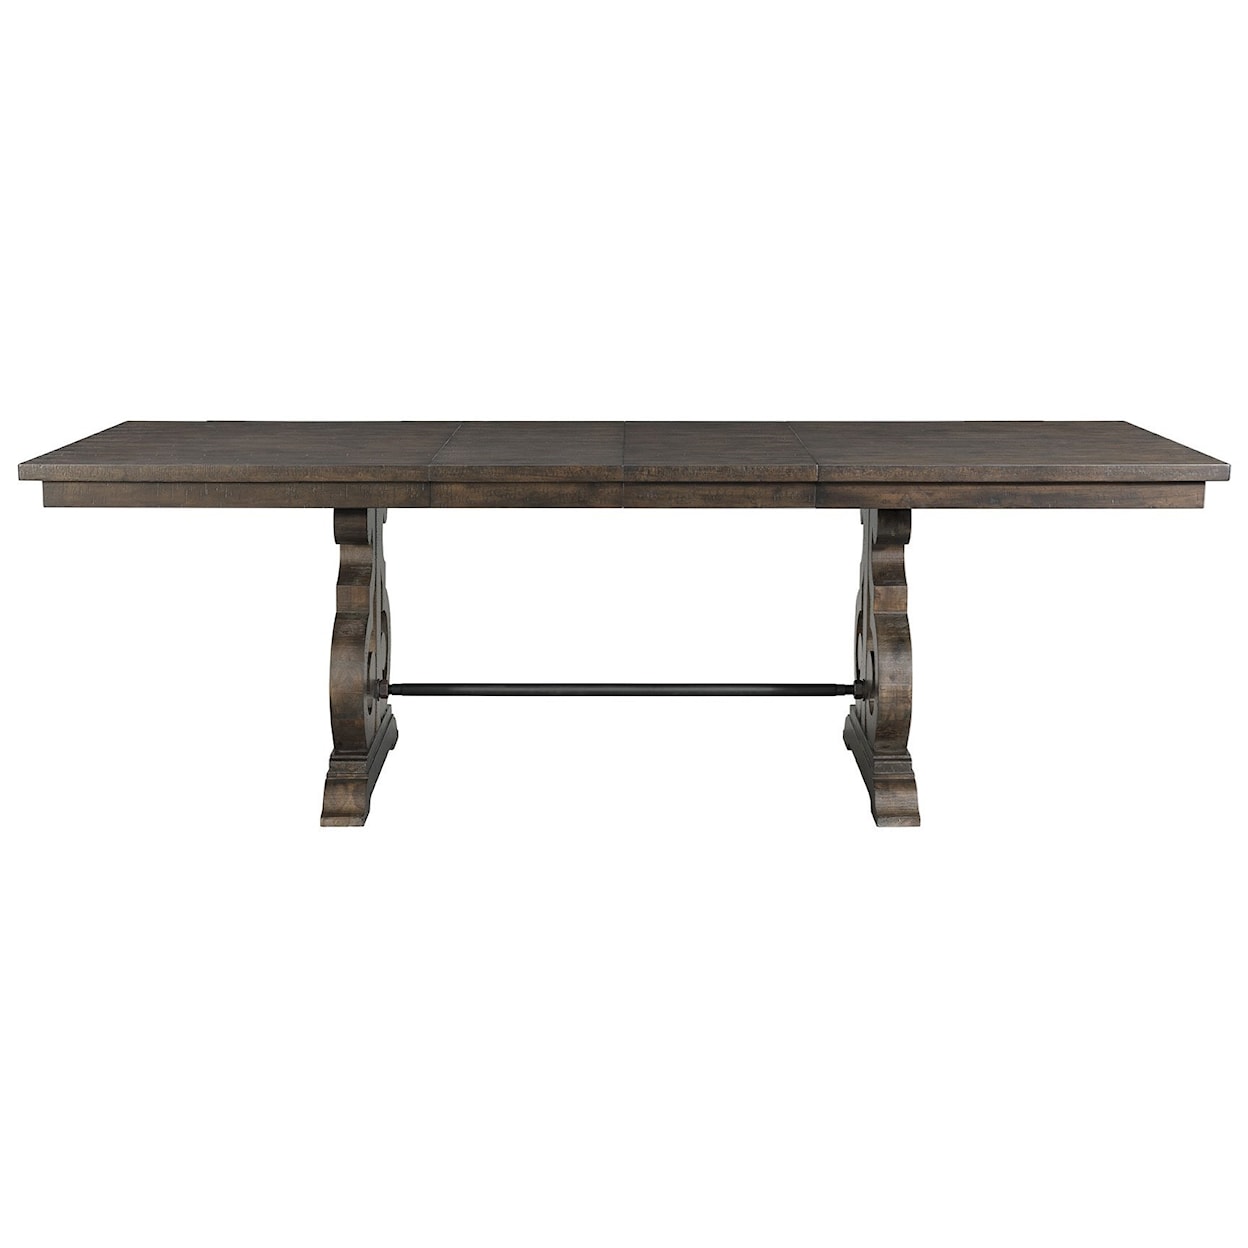 Elements International Stone Counter Height Dining Table